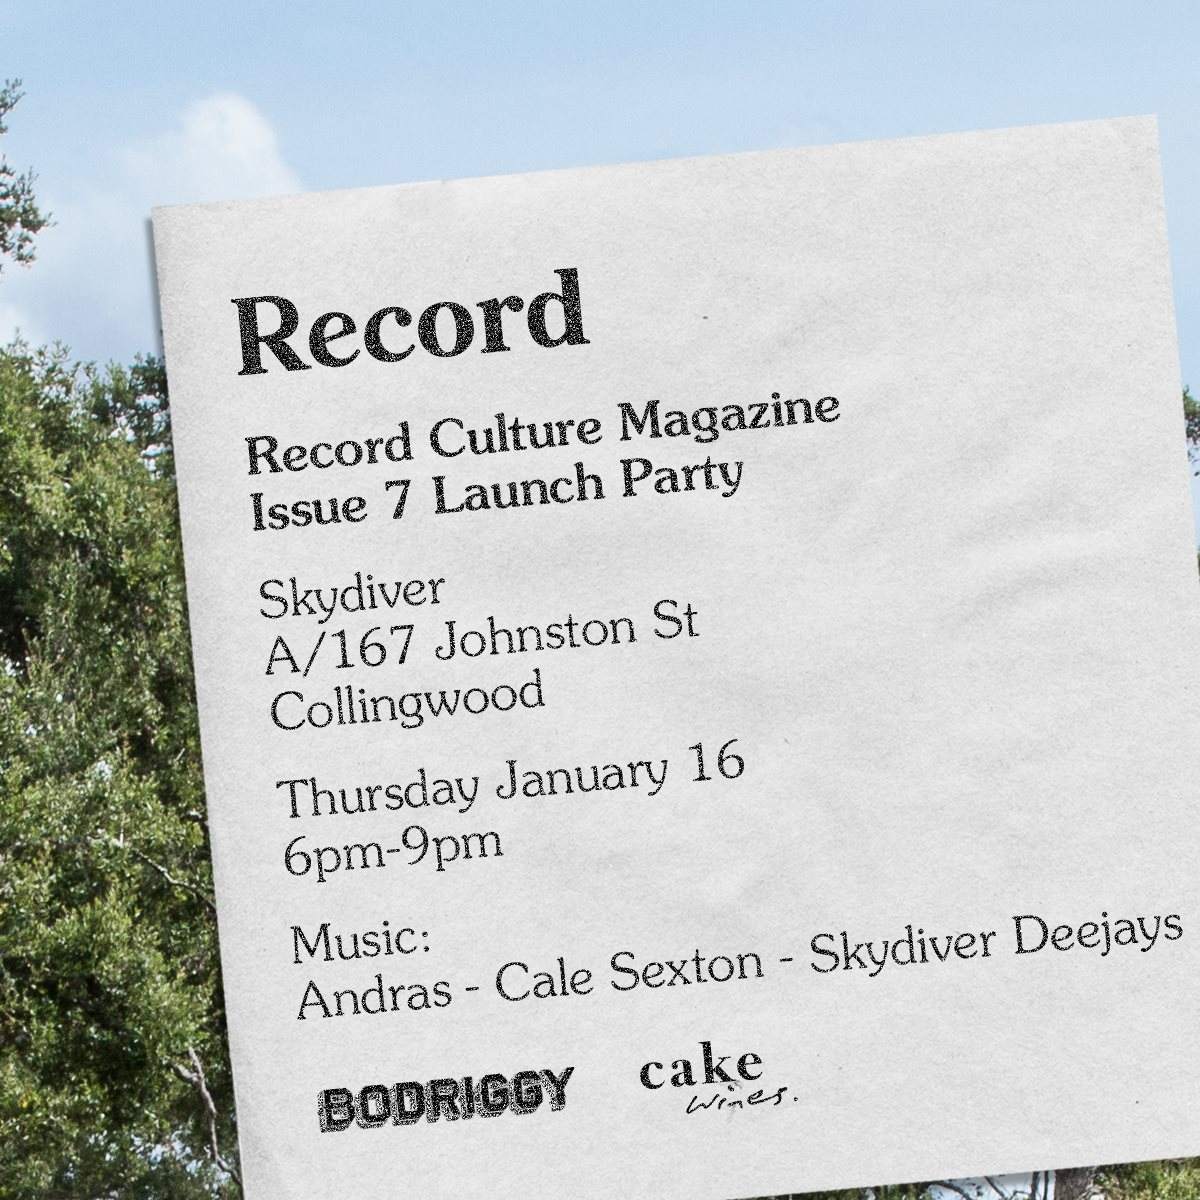 Record Culture Magazine Issue 7 Launch Party - フライヤー表